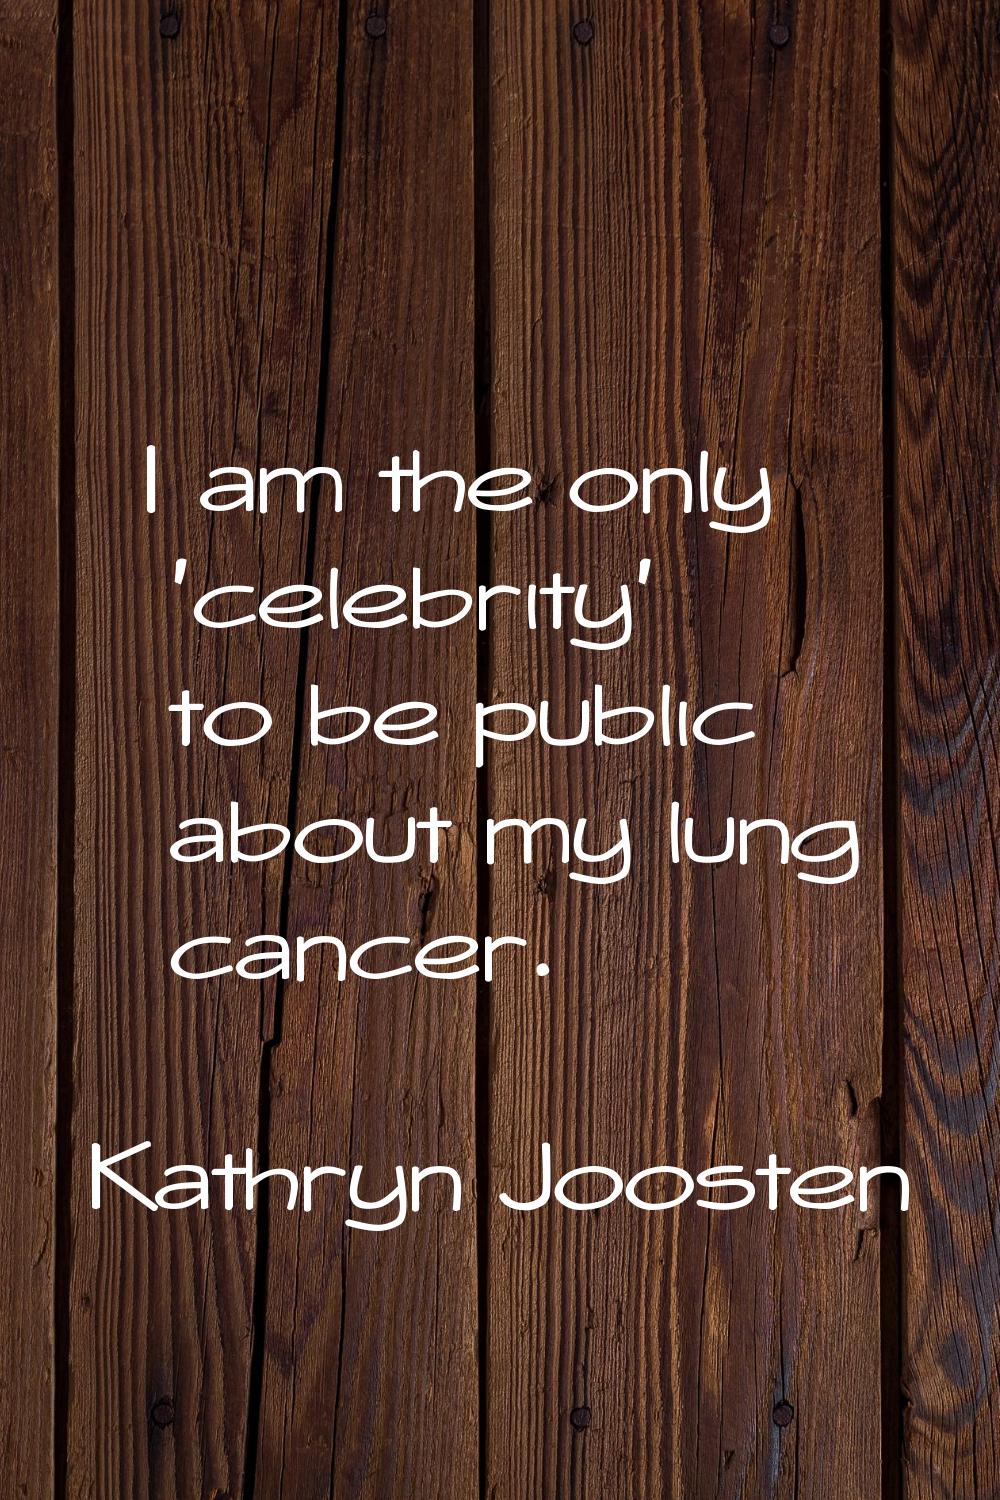 I am the only 'celebrity' to be public about my lung cancer.